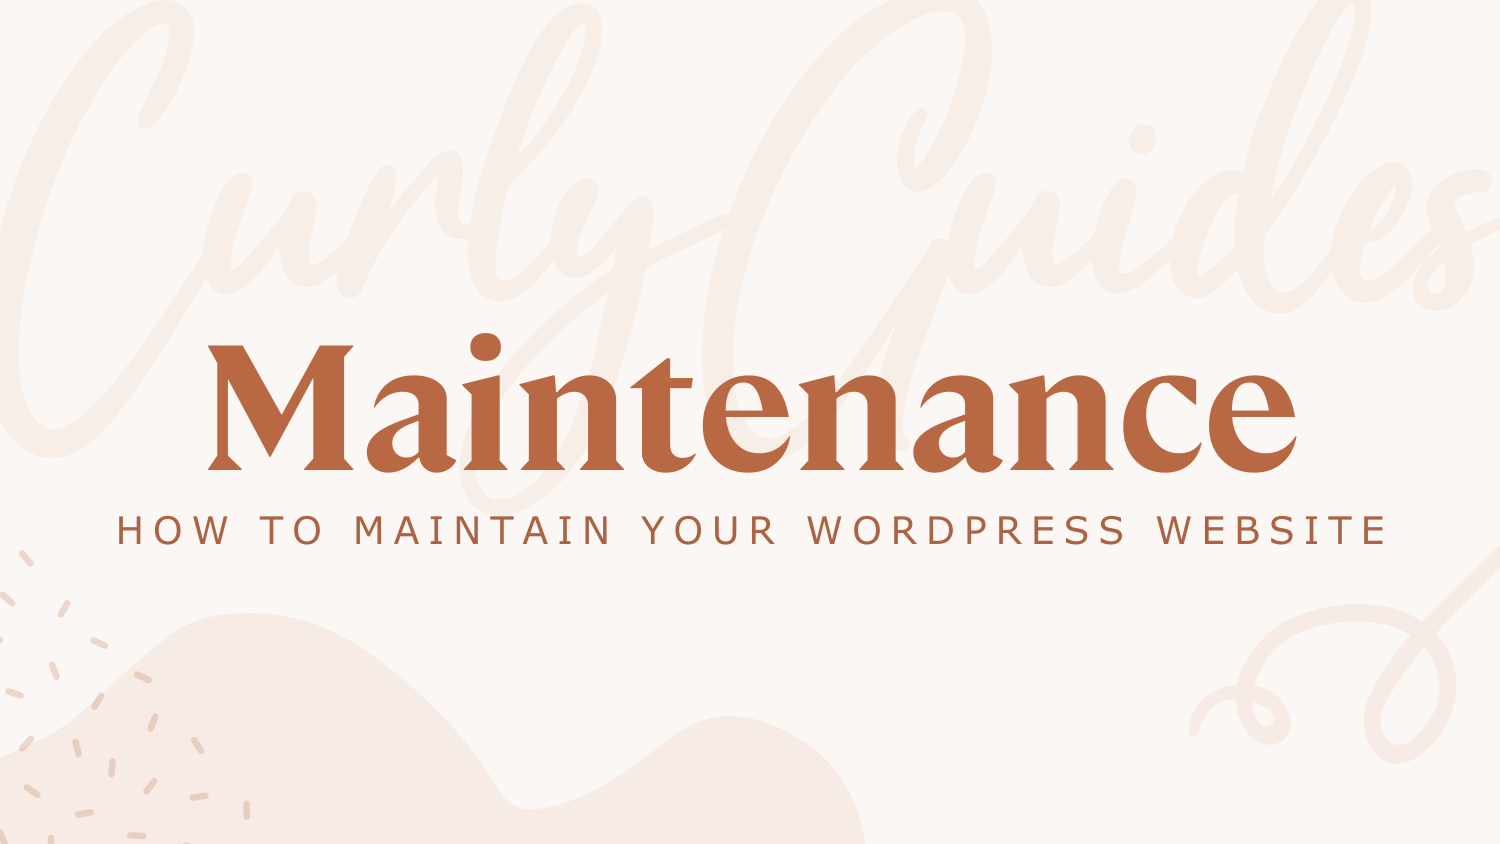 How To Maintain Your WordPress Website